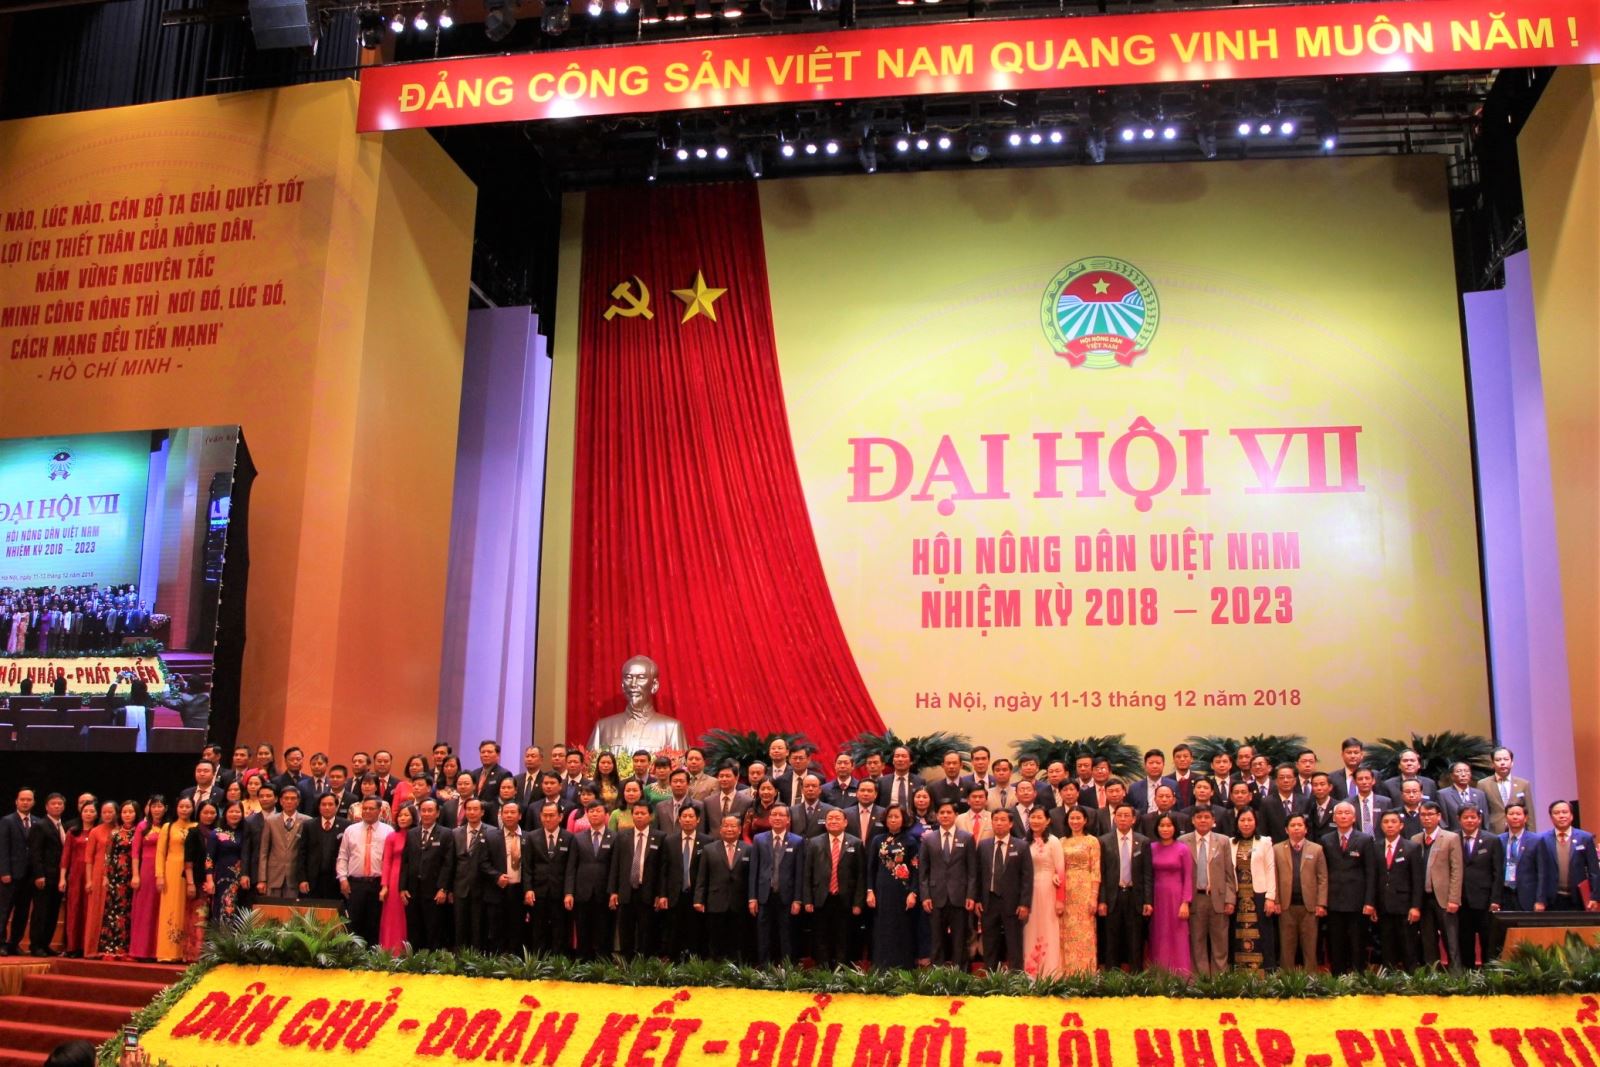 07 propaganda contents for the 8th National Congress of the Vietnam Farmers' Union, term 2023-2028 in Vietnam